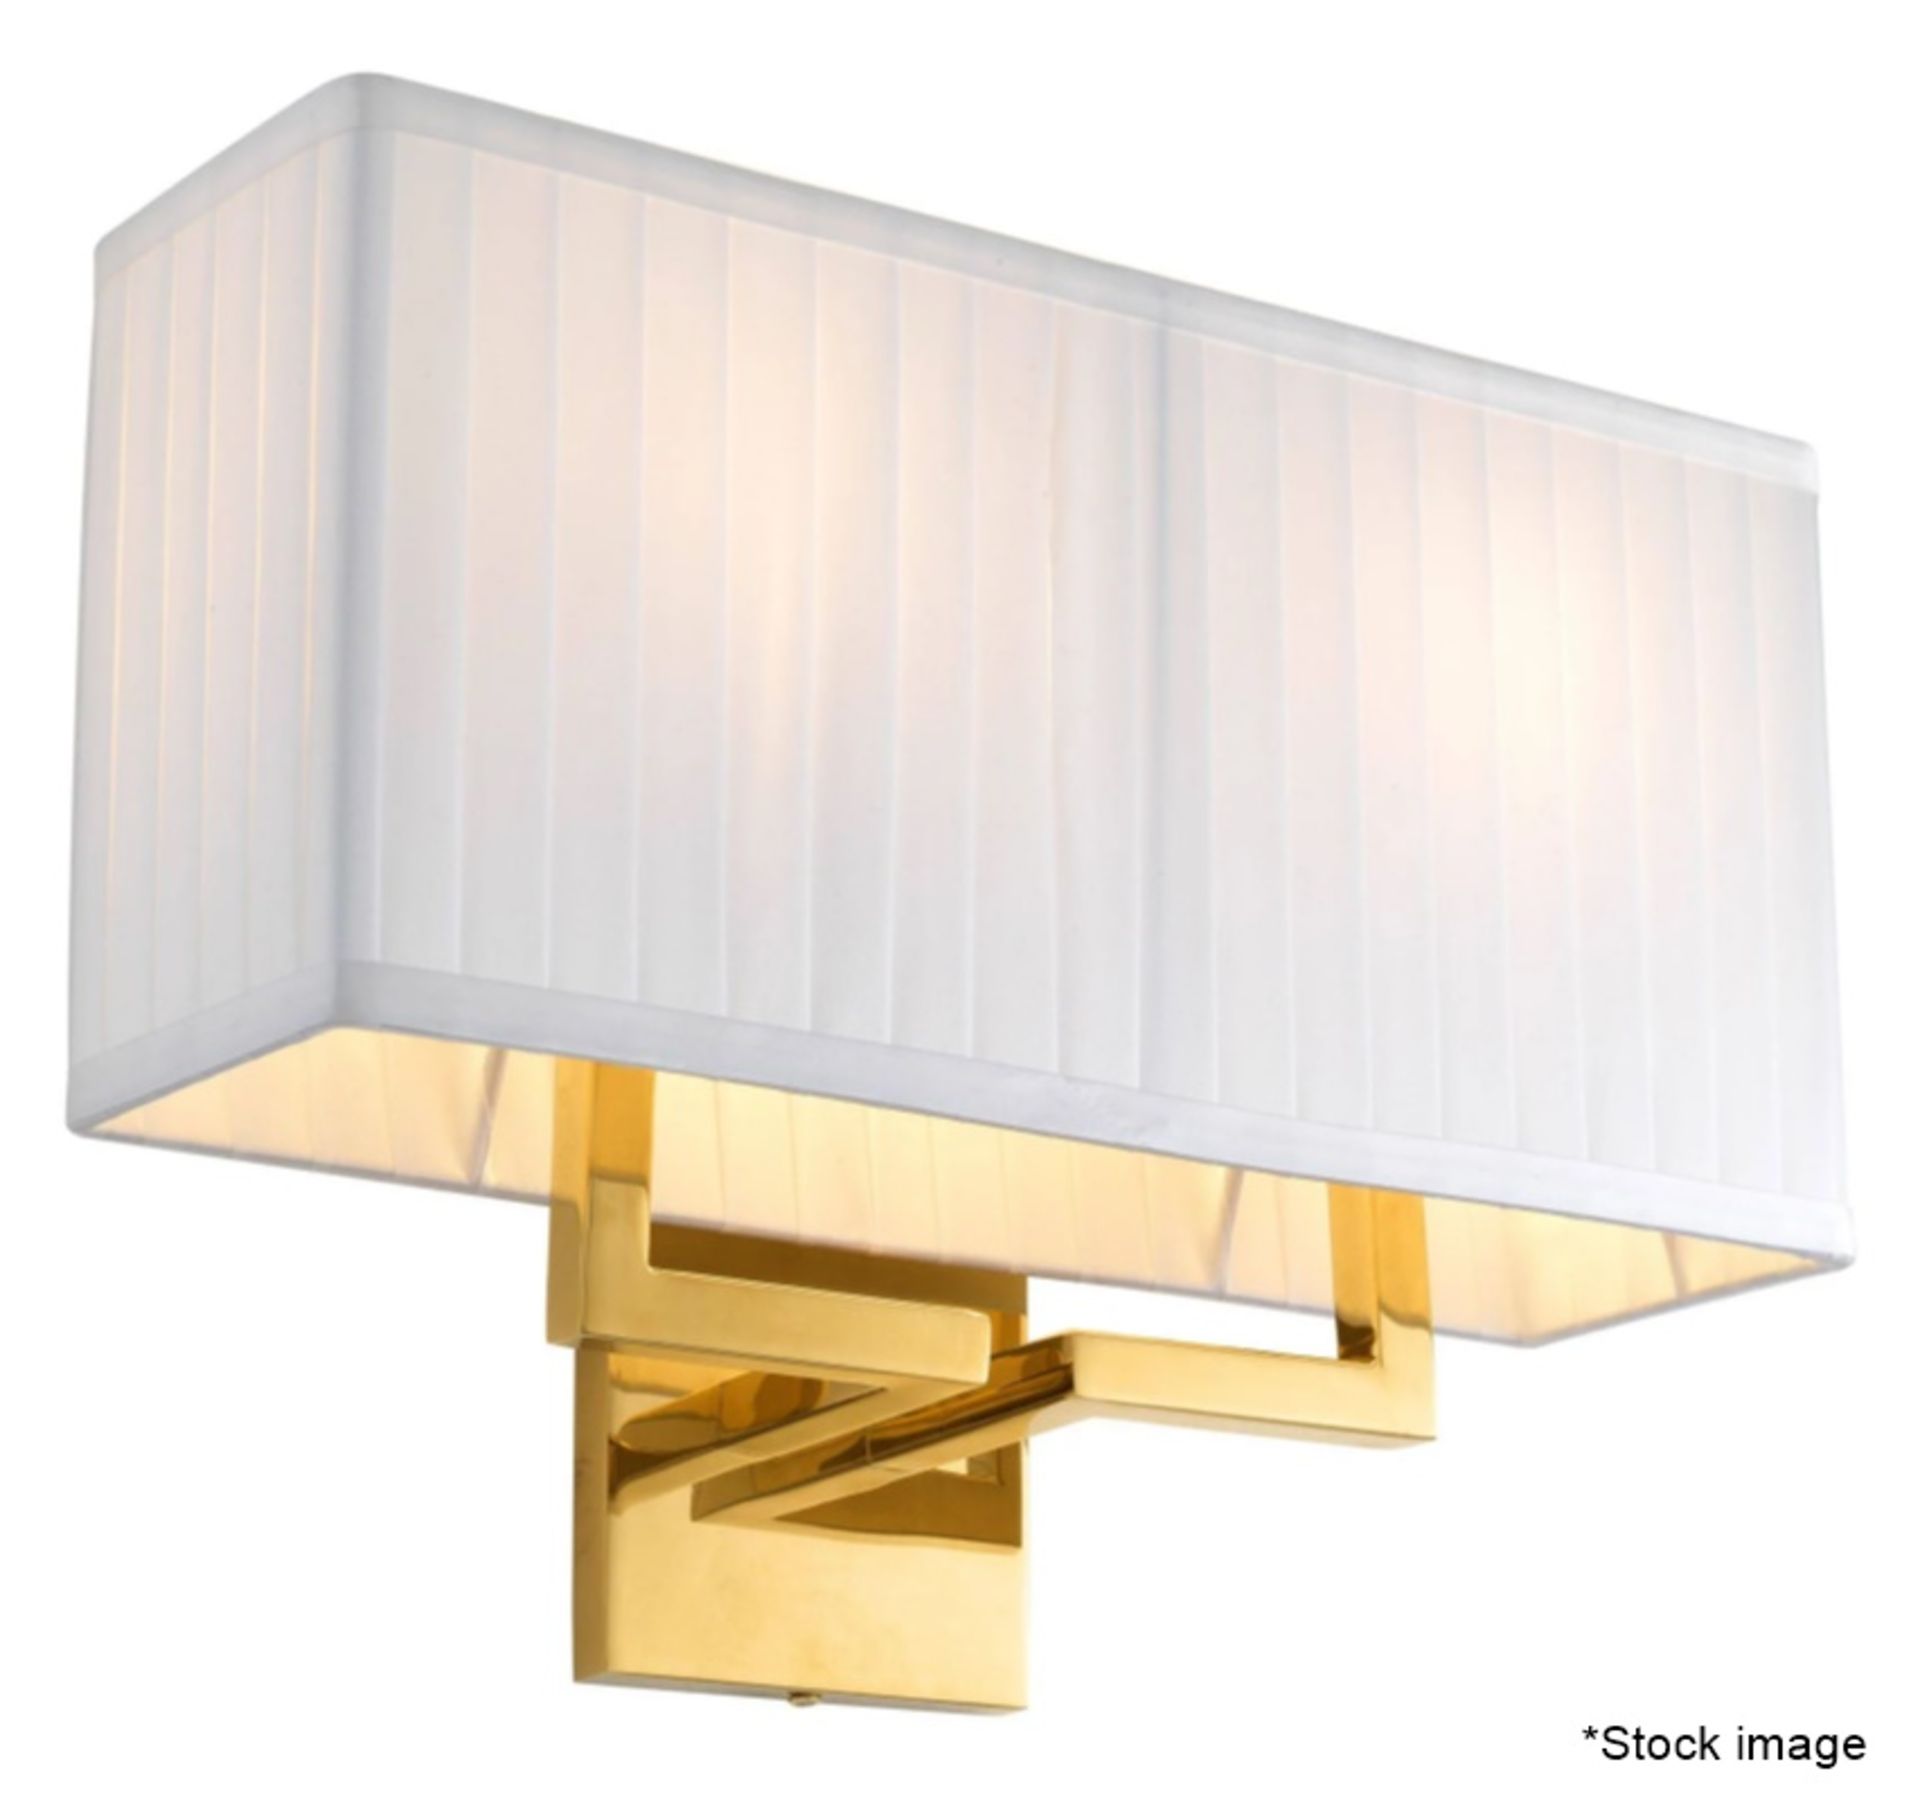 1 x EICHHOLTZ Westbrook Luxury Wall Lamp with Gold Finish and Pleated White Lampshade - RRP £450.00 - Image 2 of 11